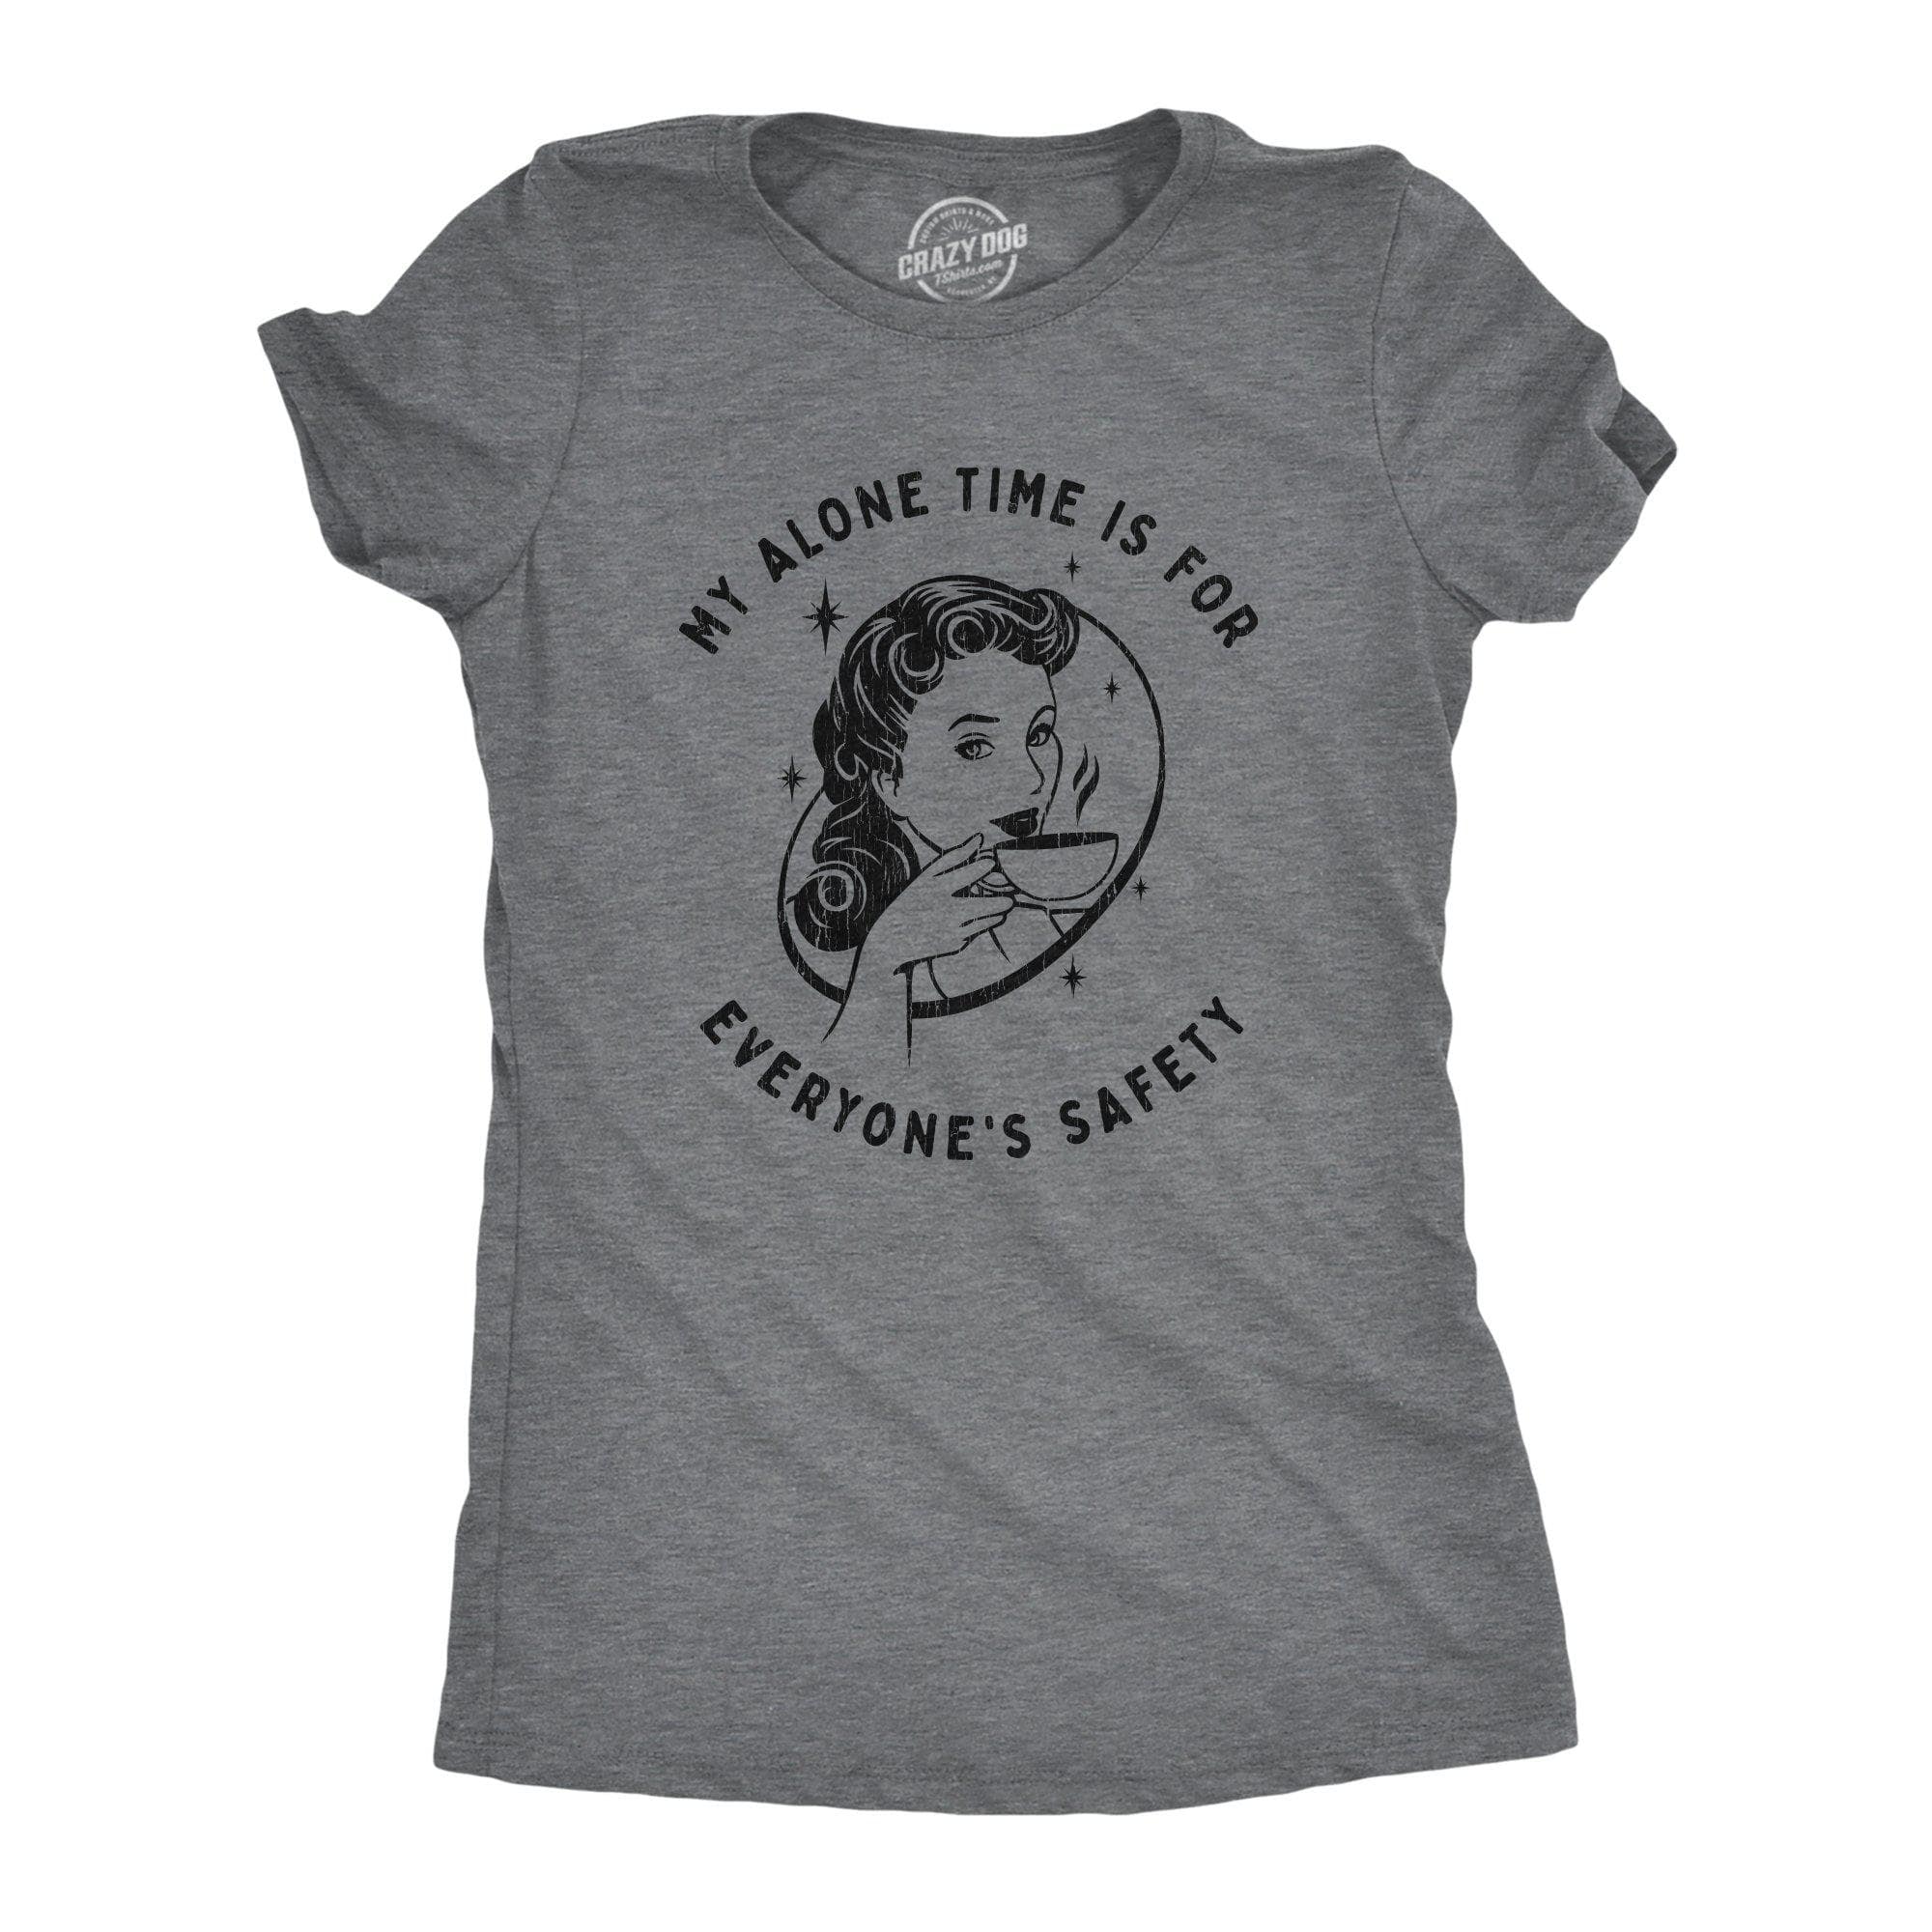 My Alone Time Is For Everyone's Safety Women's Tshirt  -  Crazy Dog T-Shirts